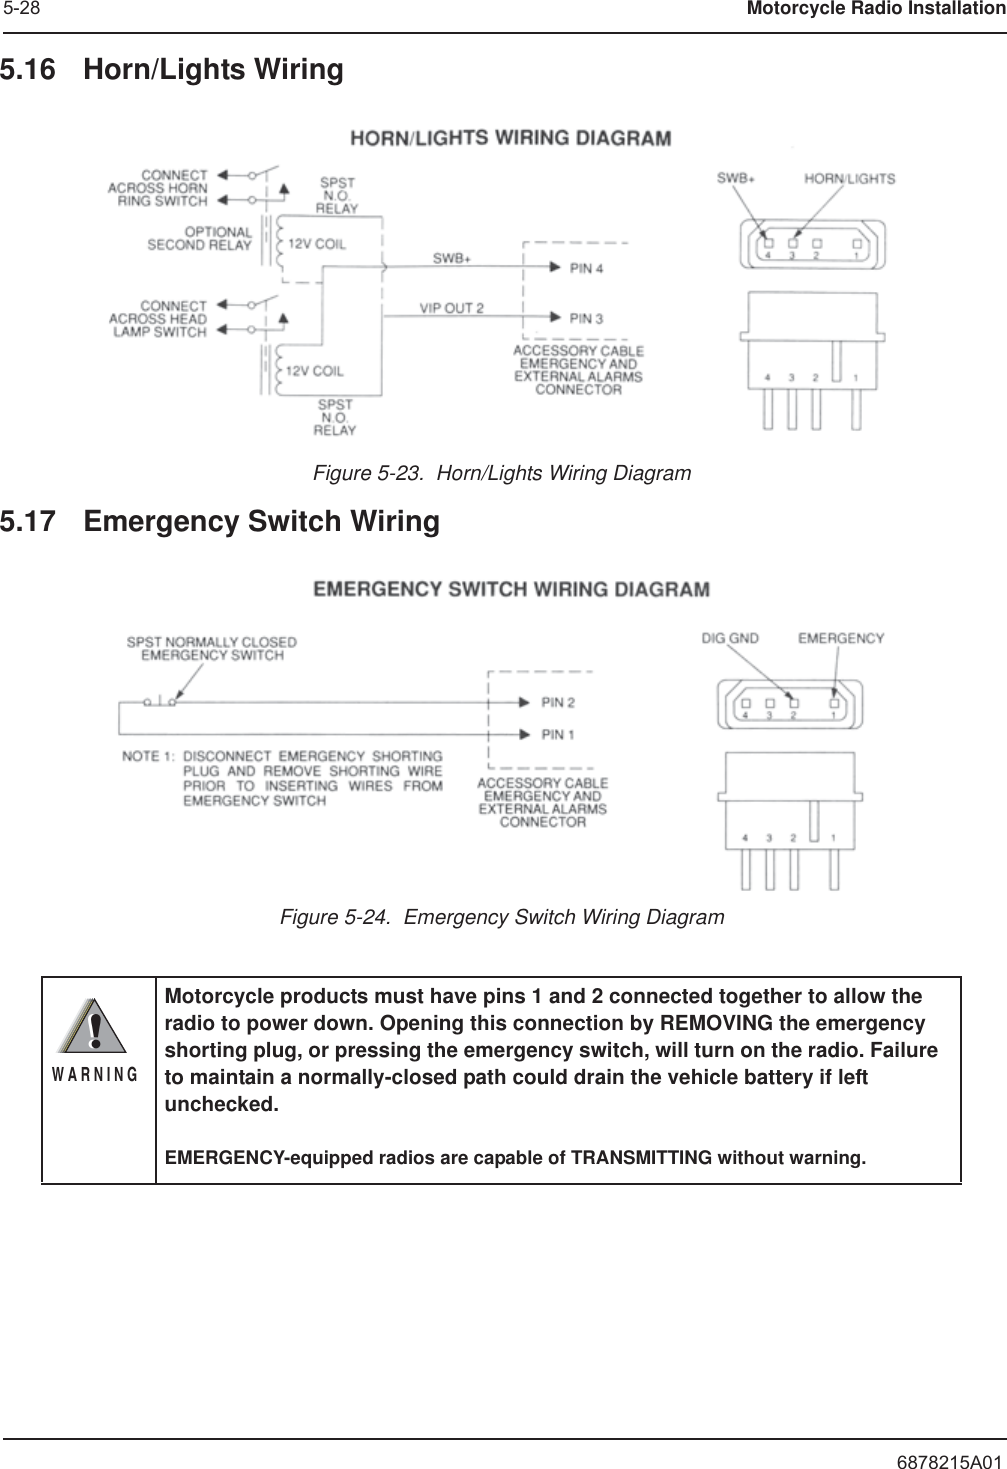 6878215A015-28 Motorcycle Radio Installation5.16 Horn/Lights WiringFigure 5-23.  Horn/Lights Wiring Diagram5.17 Emergency Switch WiringFigure 5-24.  Emergency Switch Wiring DiagramMotorcycle products must have pins 1 and 2 connected together to allow the radio to power down. Opening this connection by REMOVING the emergency shorting plug, or pressing the emergency switch, will turn on the radio. Failure to maintain a normally-closed path could drain the vehicle battery if left unchecked.EMERGENCY-equipped radios are capable of TRANSMITTING without warning.!W A R N I N G!